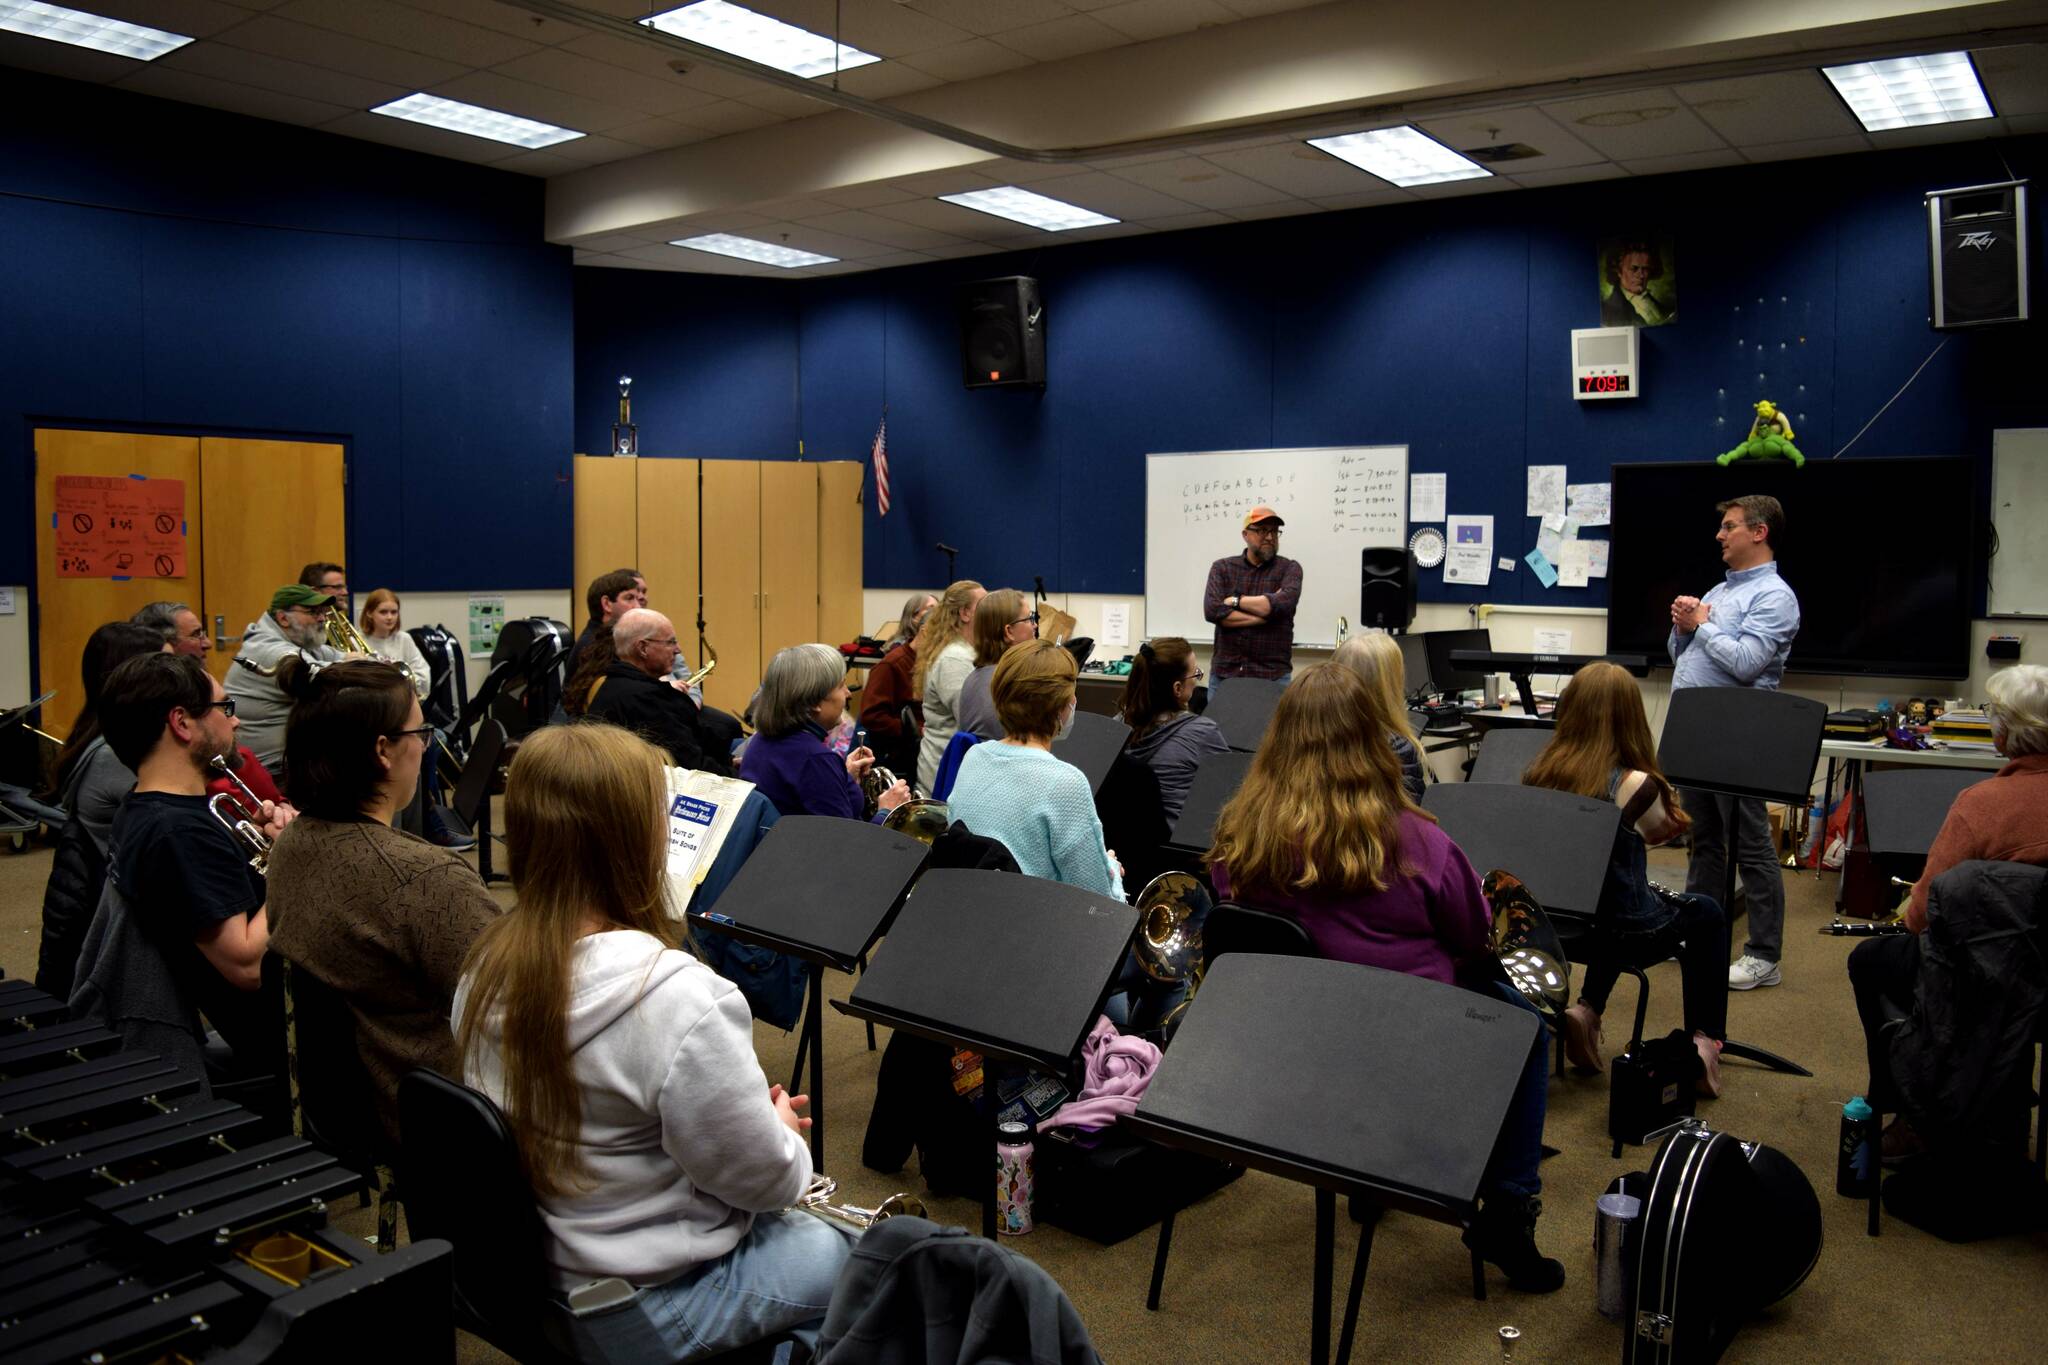 Photo by Conor Wilson/Valley Record.
Band Director Mike Herb and Dean Snavely speak to members of the SnoValley Winds band before its first rehearsal.